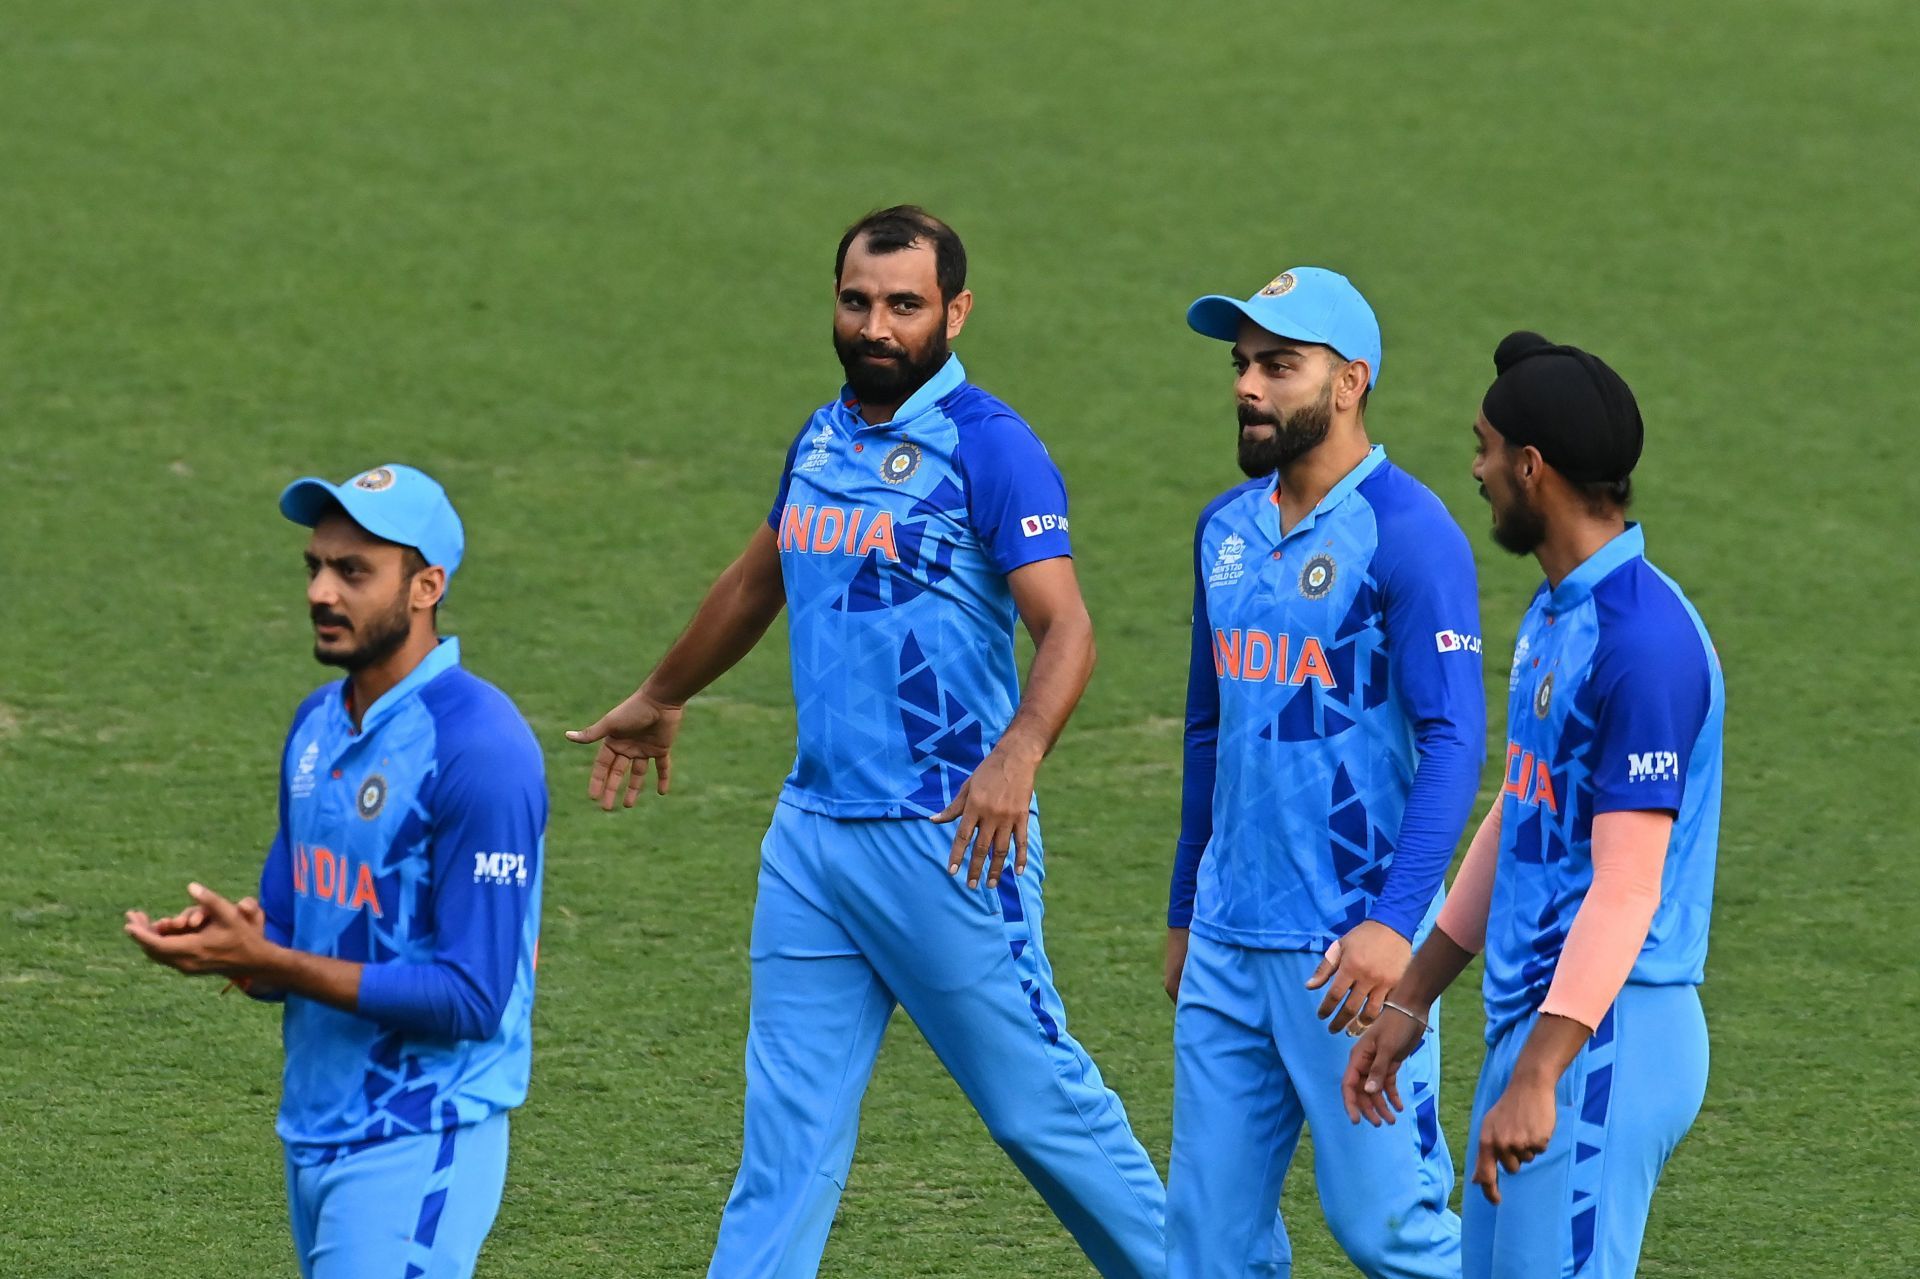 Mohammad Shami bowled an exceptional final over in India